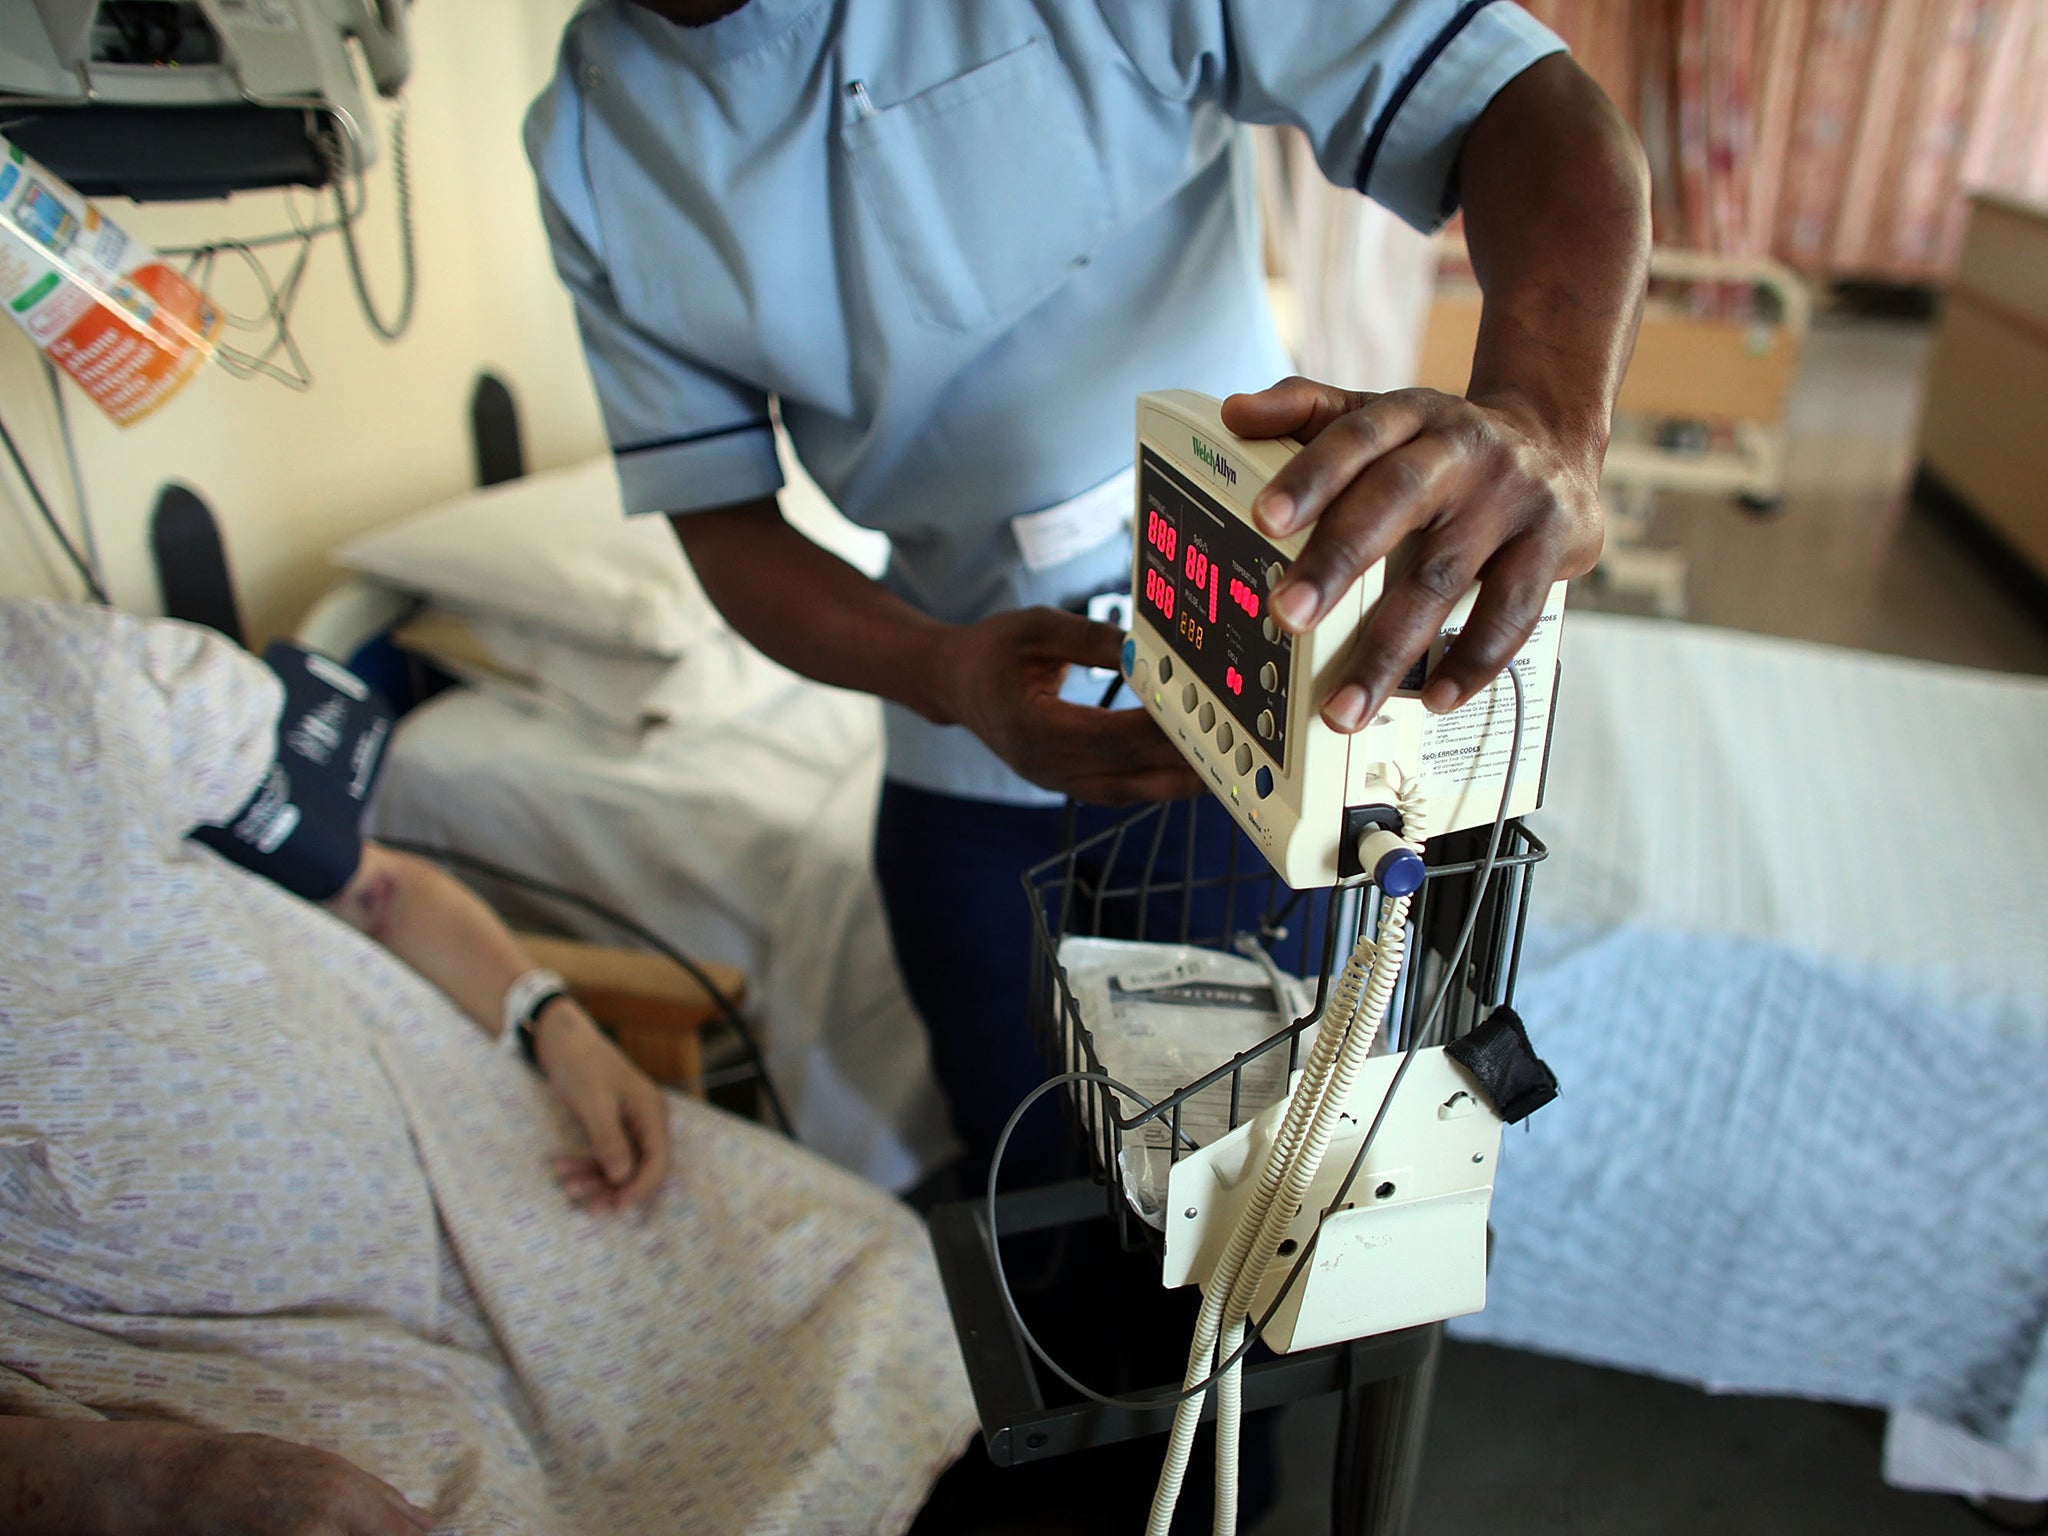 Registered nurses assess patient health problems and needs